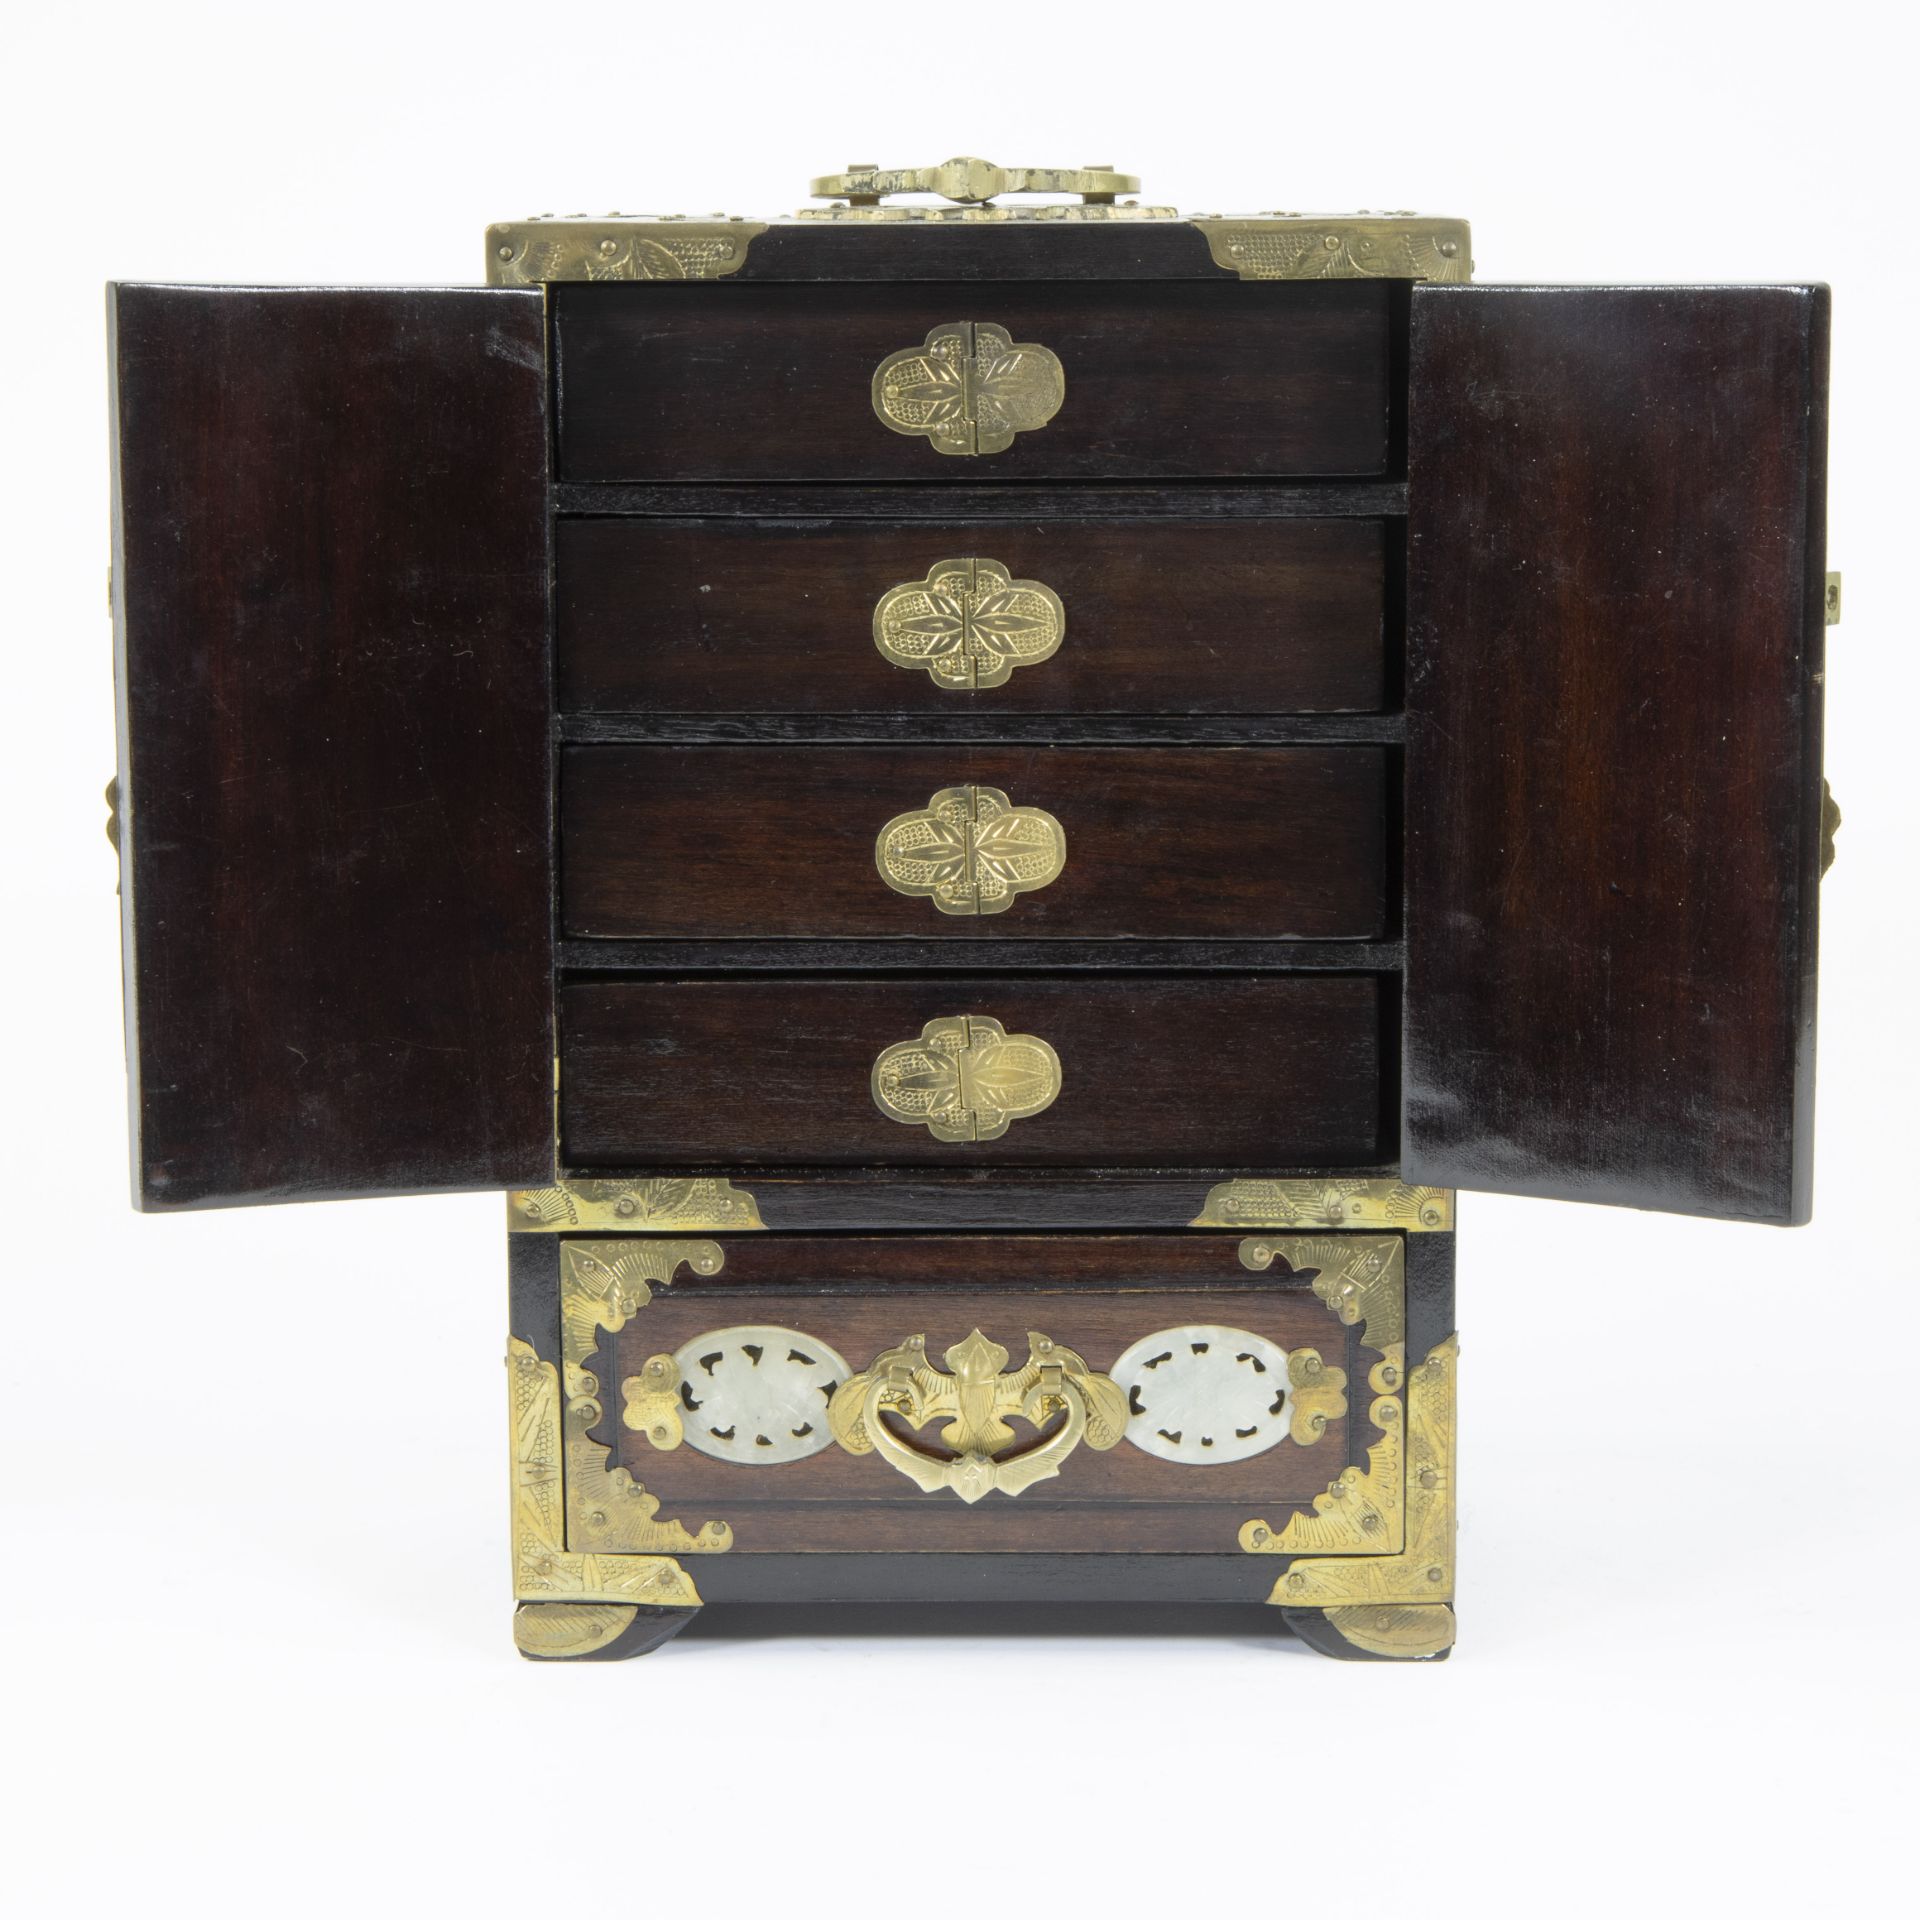 Chinese jewellery box in rosewood with brass fittings and jade plaques - Image 2 of 5